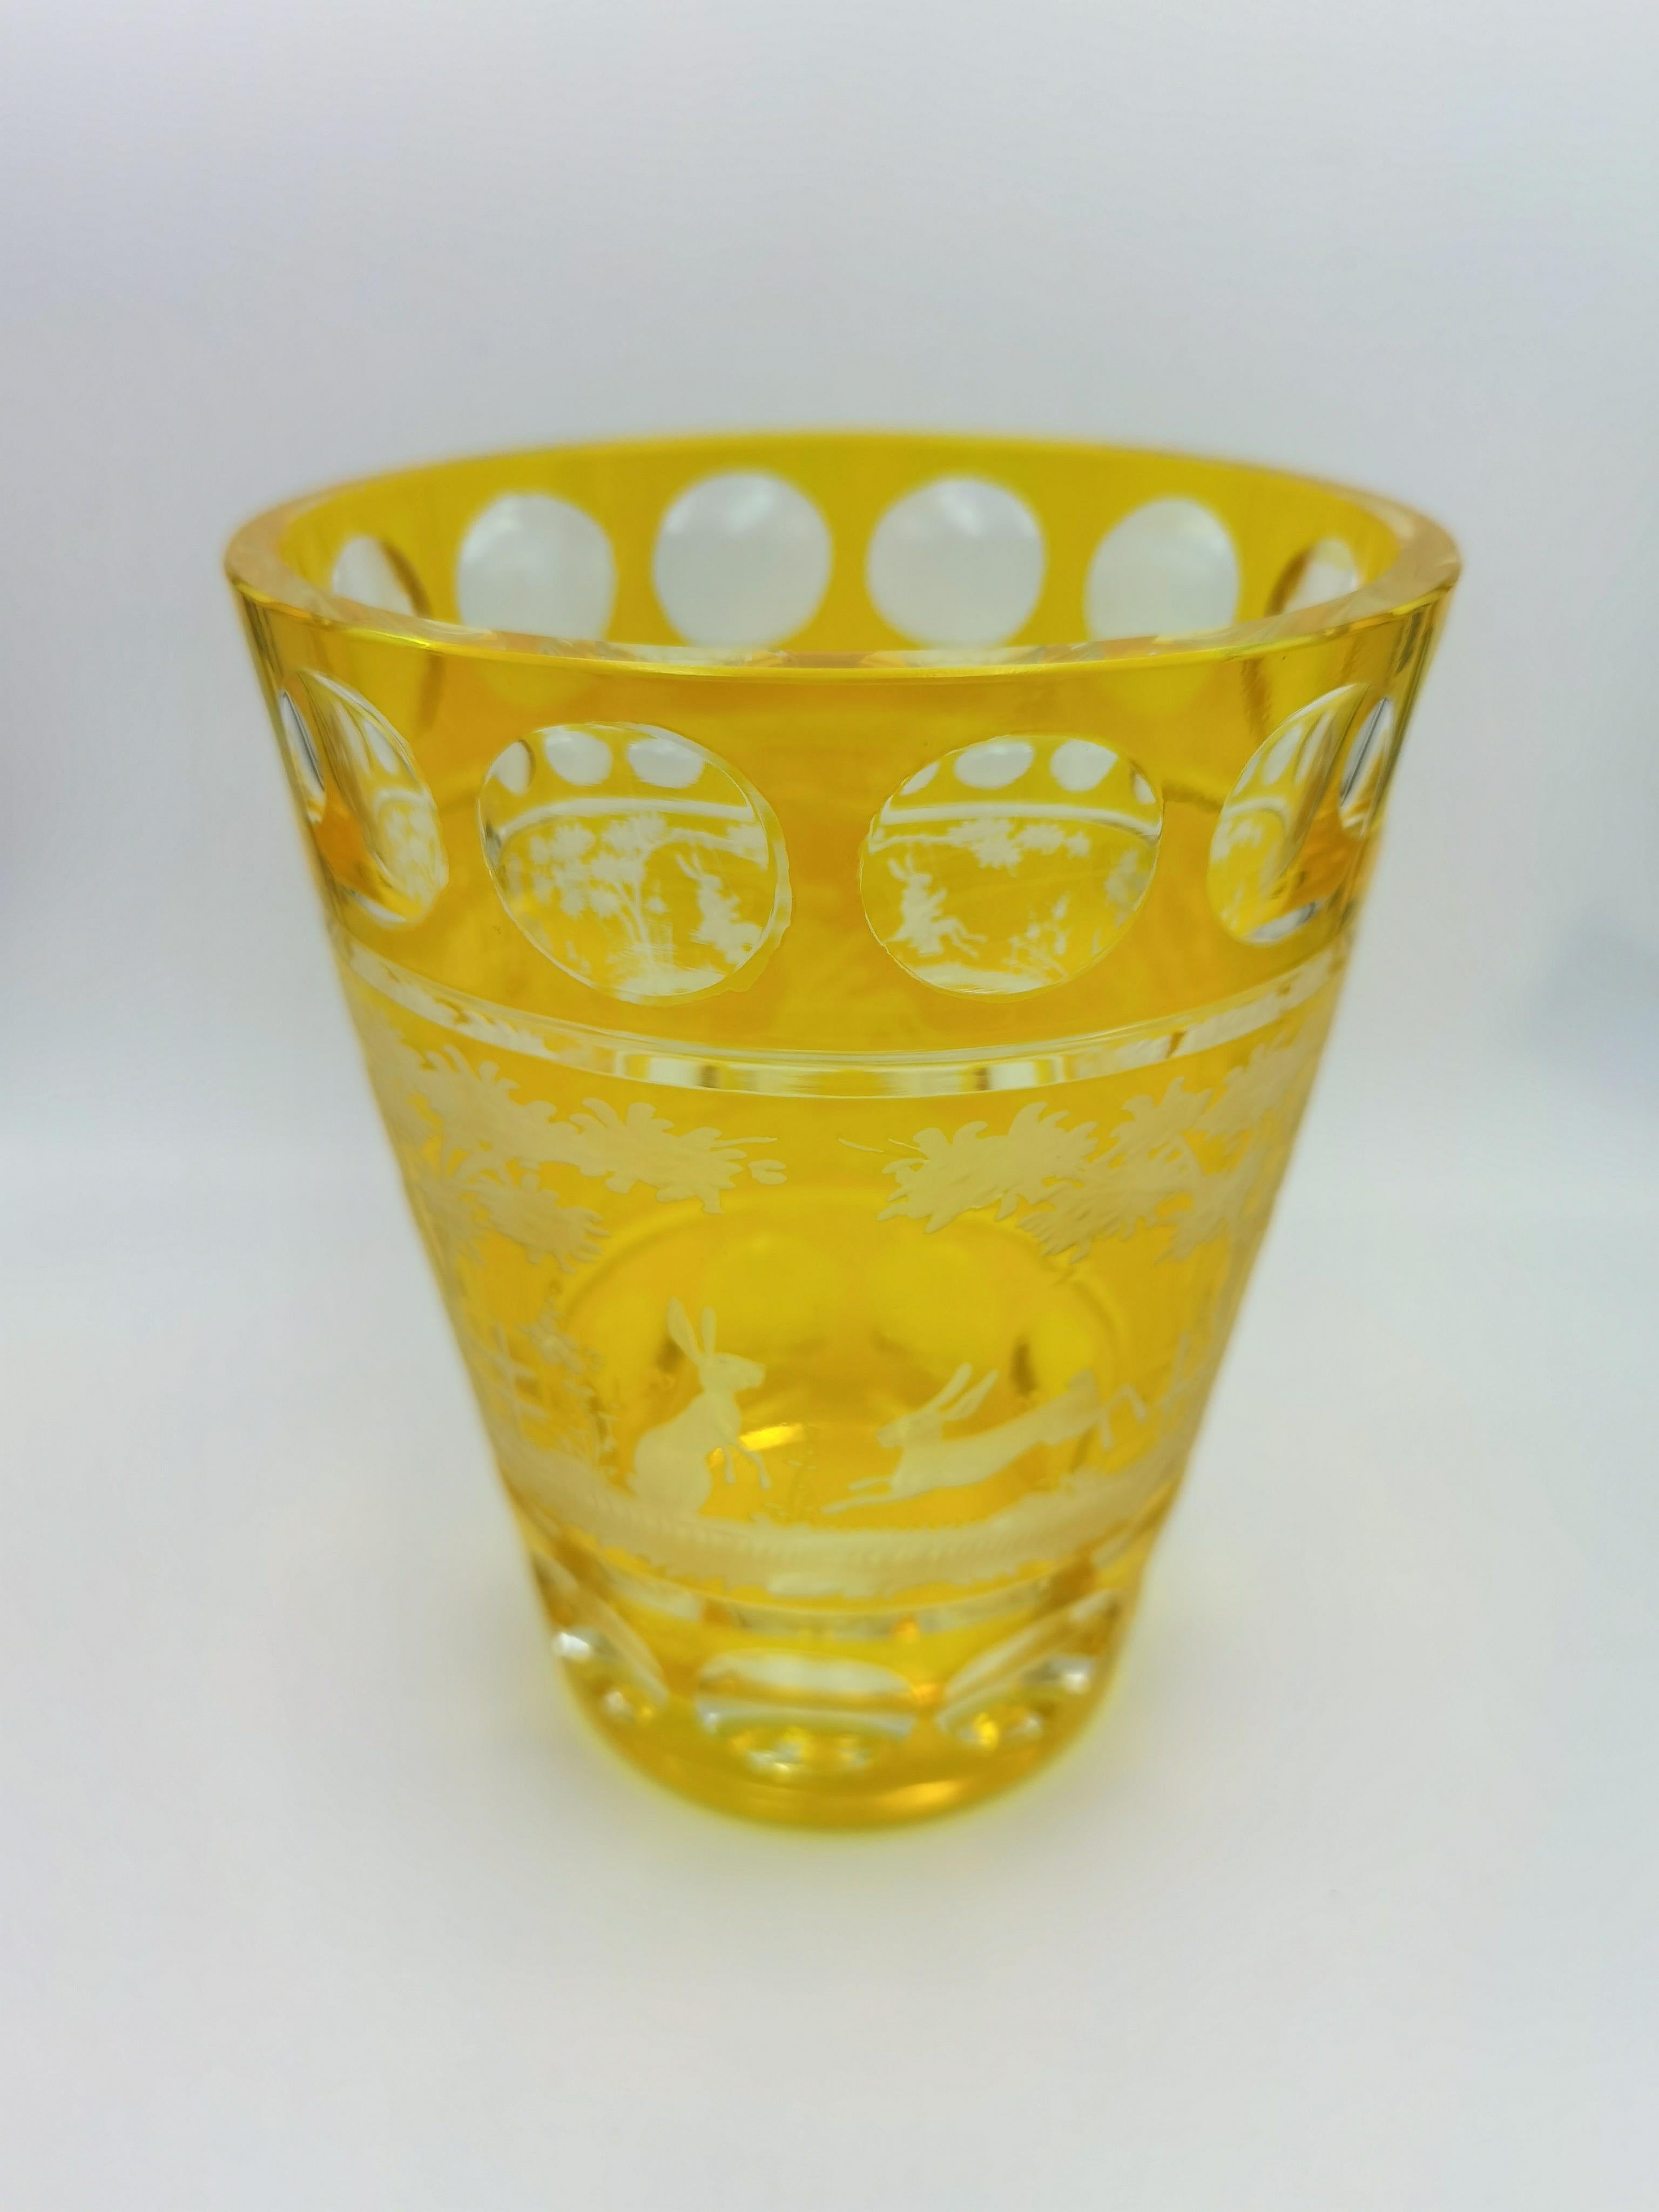 Hand blown crystal vase in yellow glass with a country style Easter decor all around. The leaves, bunny and trees are hand-engraved by glass artists in Bavaria/Germany. The glass here shown comes in a yellow color and can be ordered in different